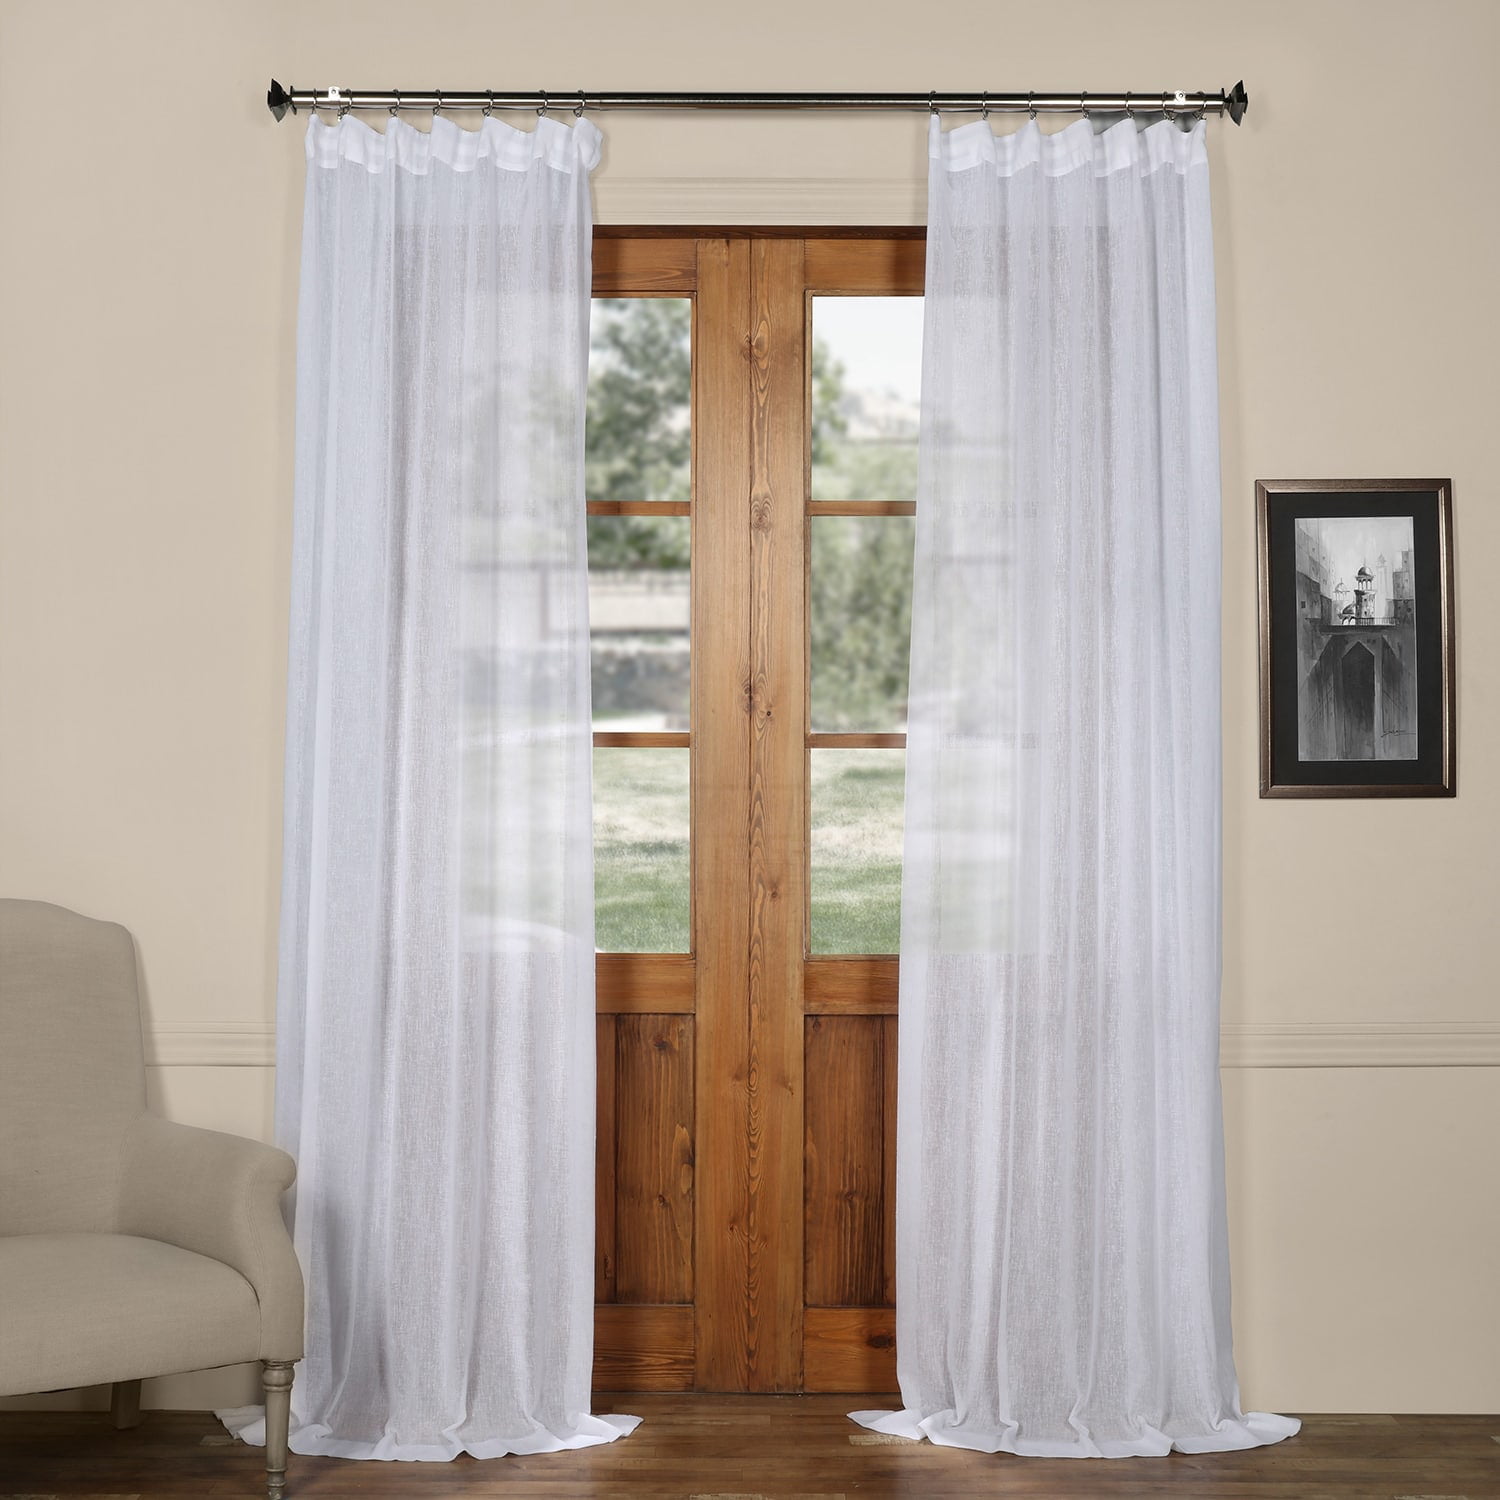 50-500 Piece Drapes Curtains Rolls role CURTAIN GLIDERS CURTAIN HANGING 